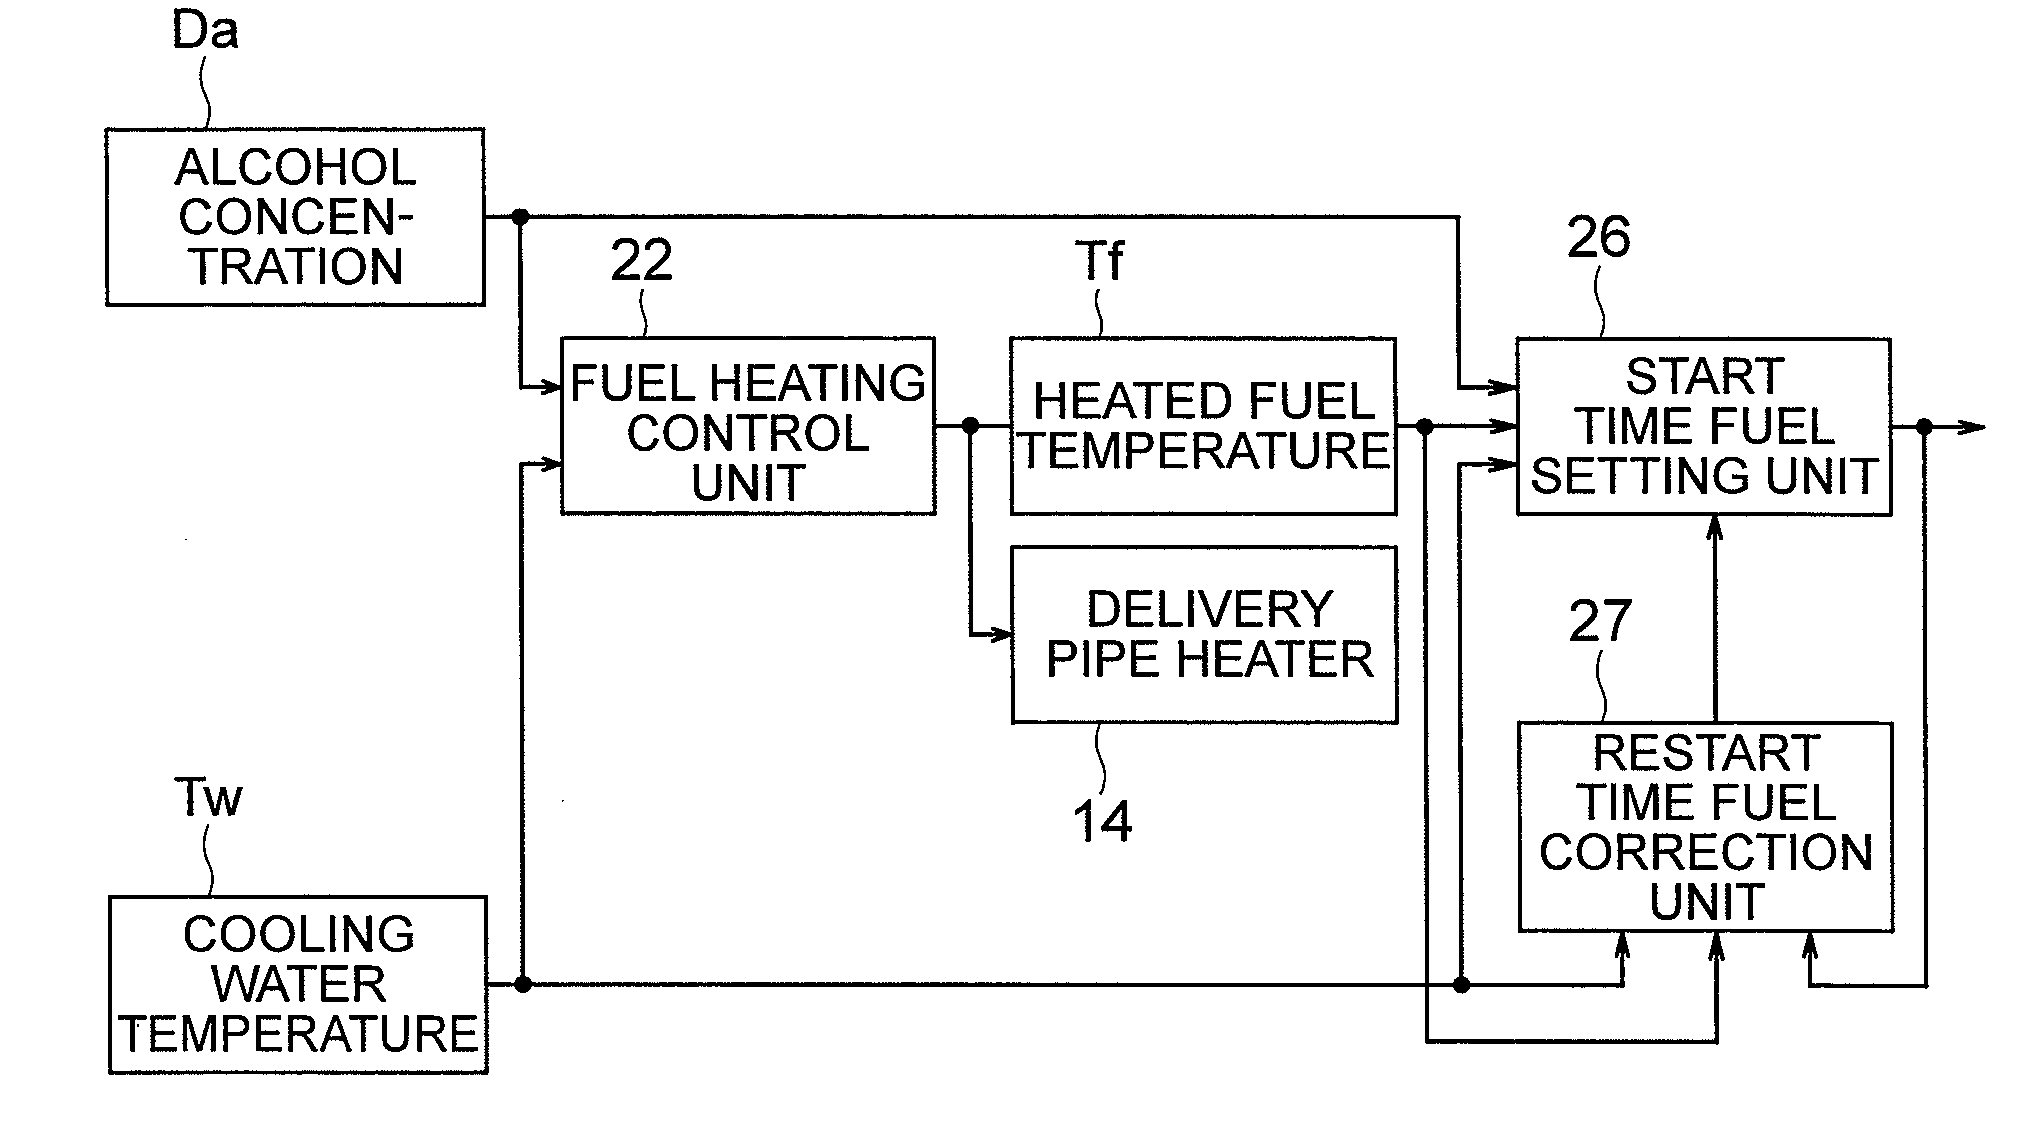 Start control apparatus for an internal combustion engine